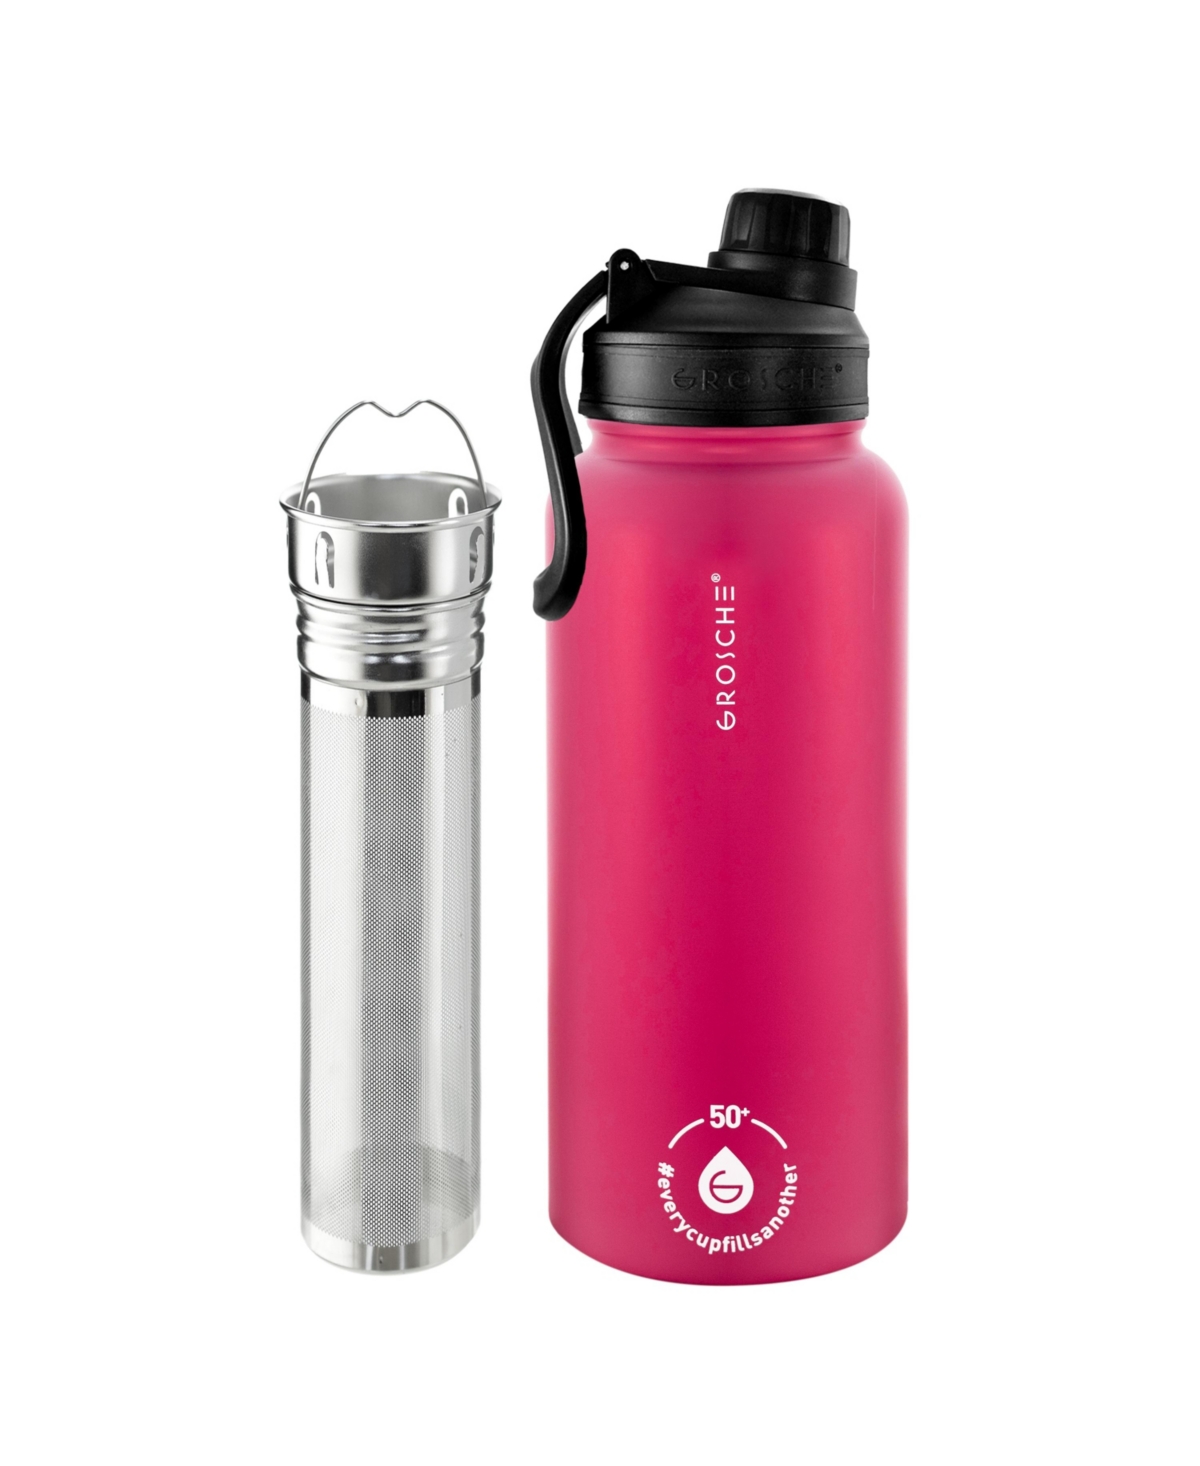 Grosche Chicago Steel Insulated Tea Infusion Flask, Tea And Coffee Tumbler, 32 Fluid oz In Fuchsia Pink